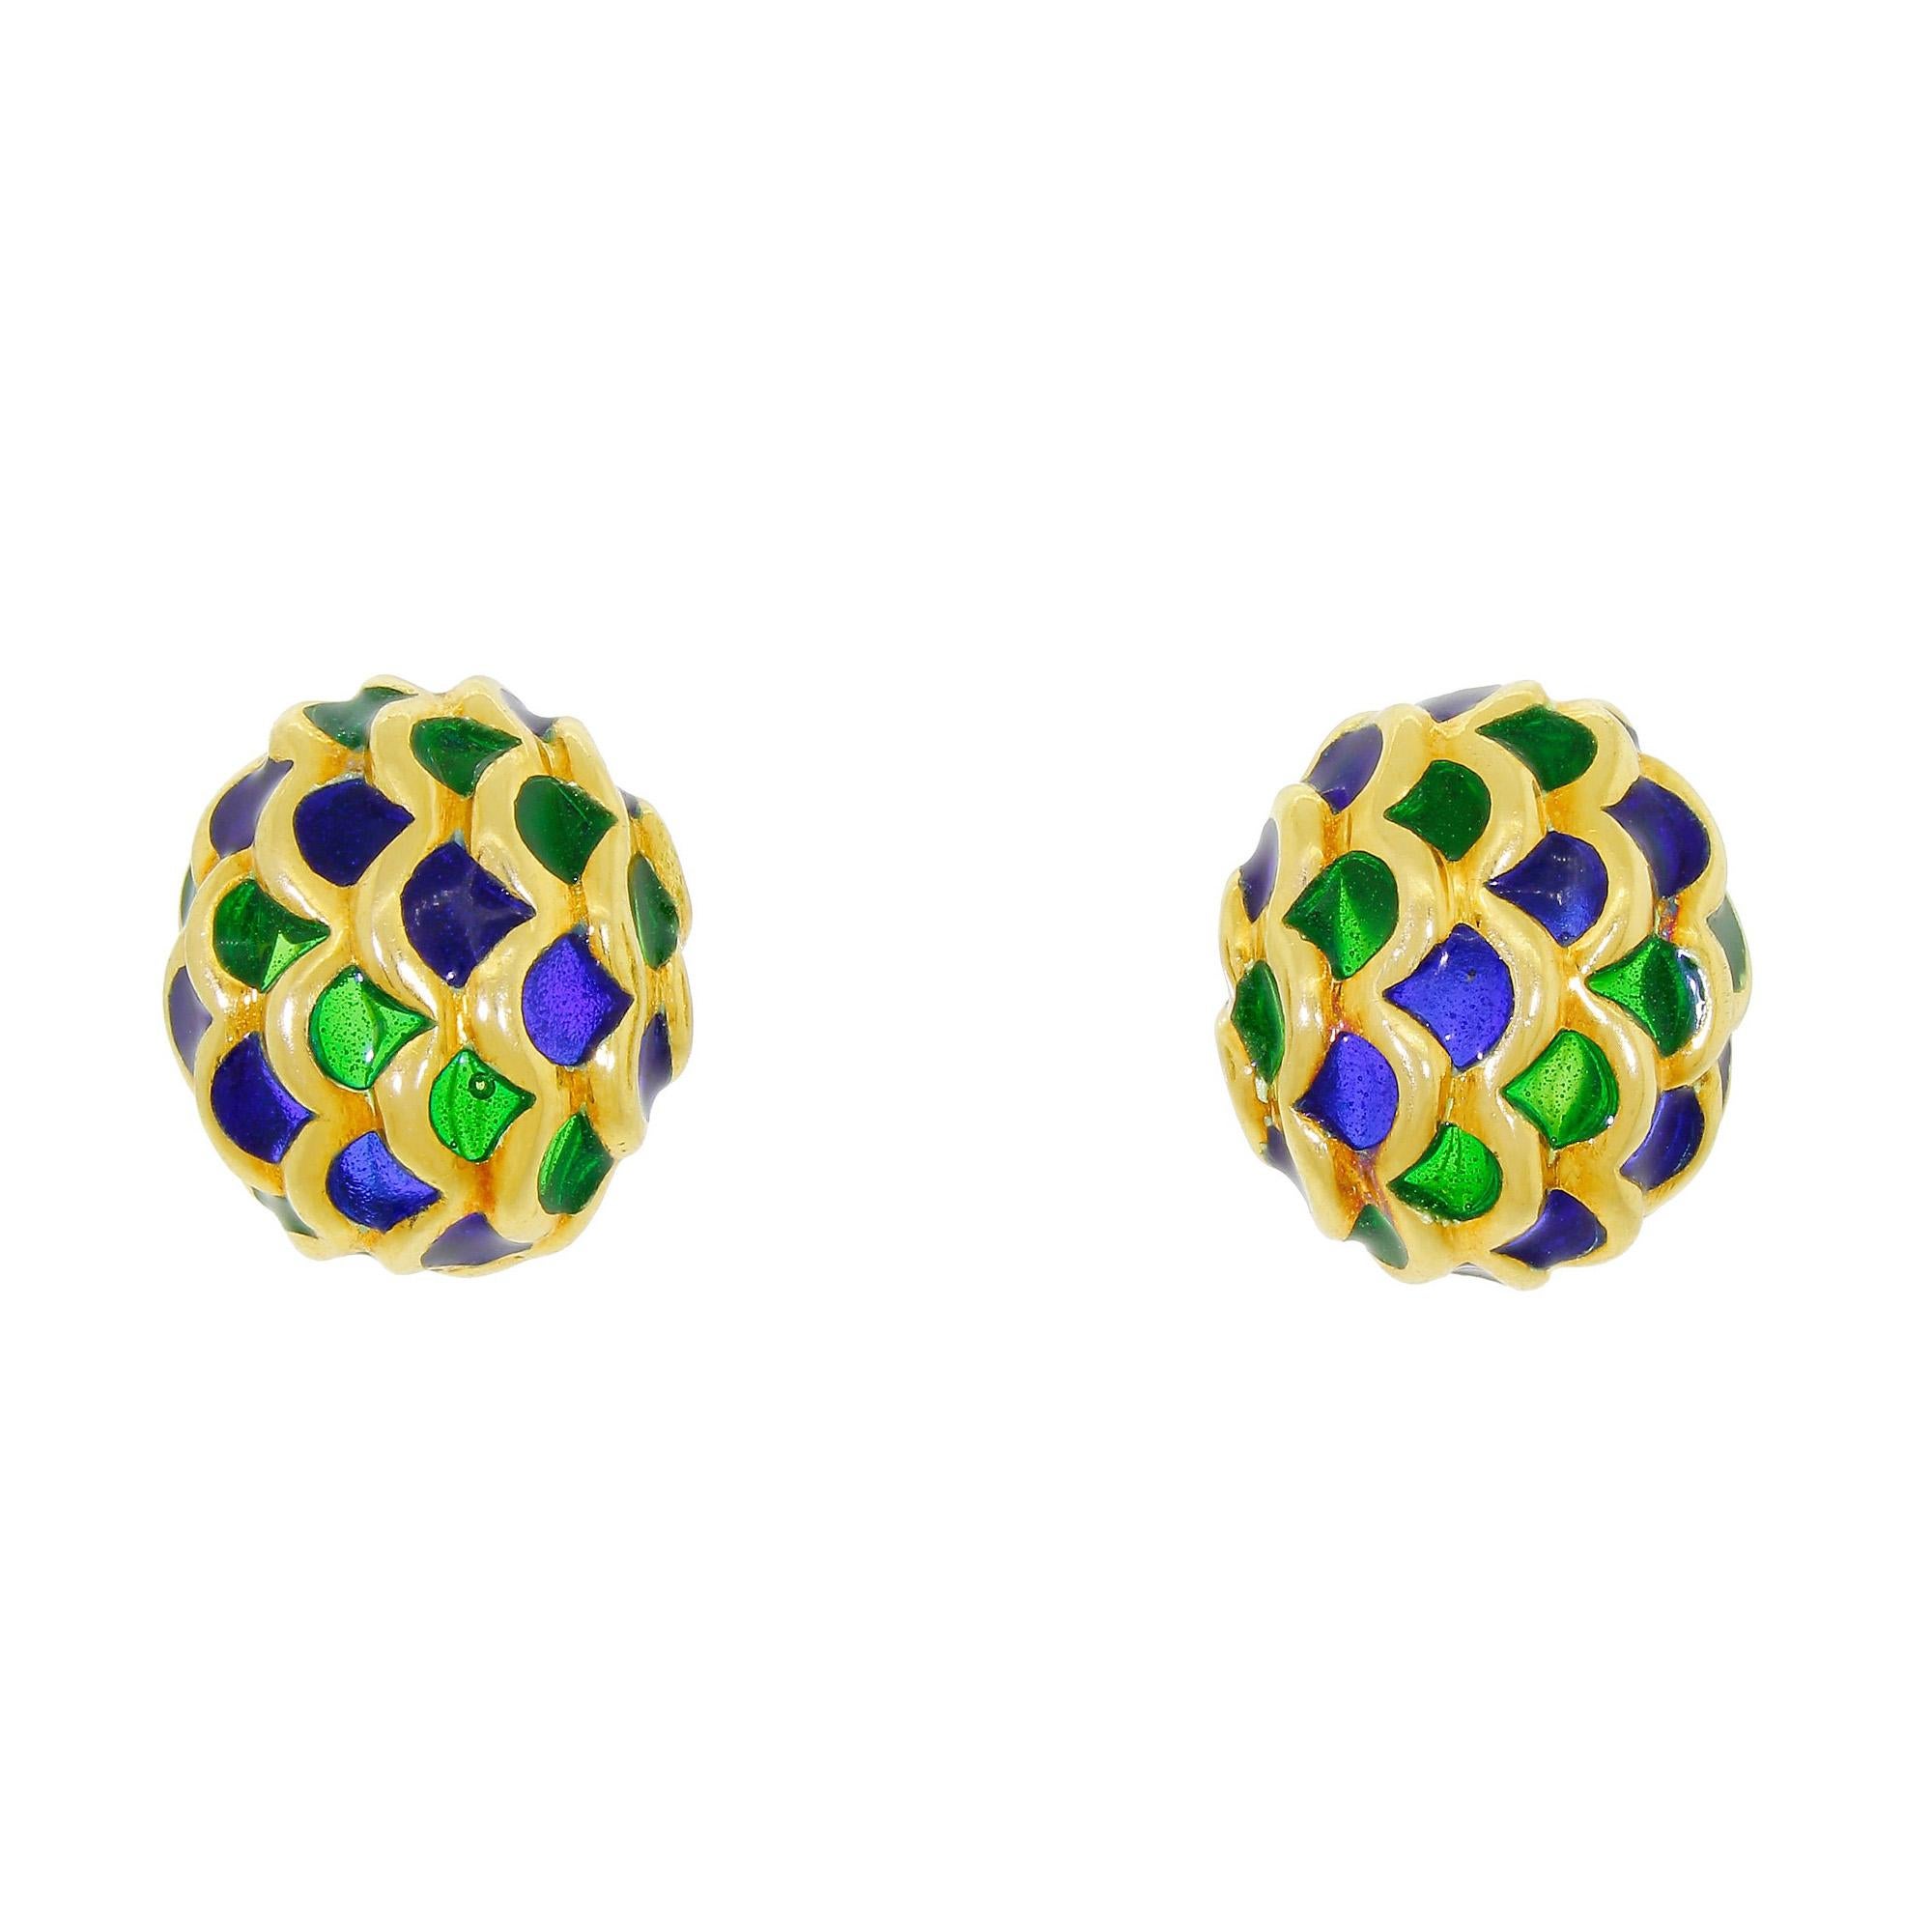 This is an elegant and very classy pair of solid 18K yellow gold plique-a-jour stained glass earrings.
These earrings are very carefully crafted, and Italian in origin. They were originally purchased in Venice at a couture jewelry store many years